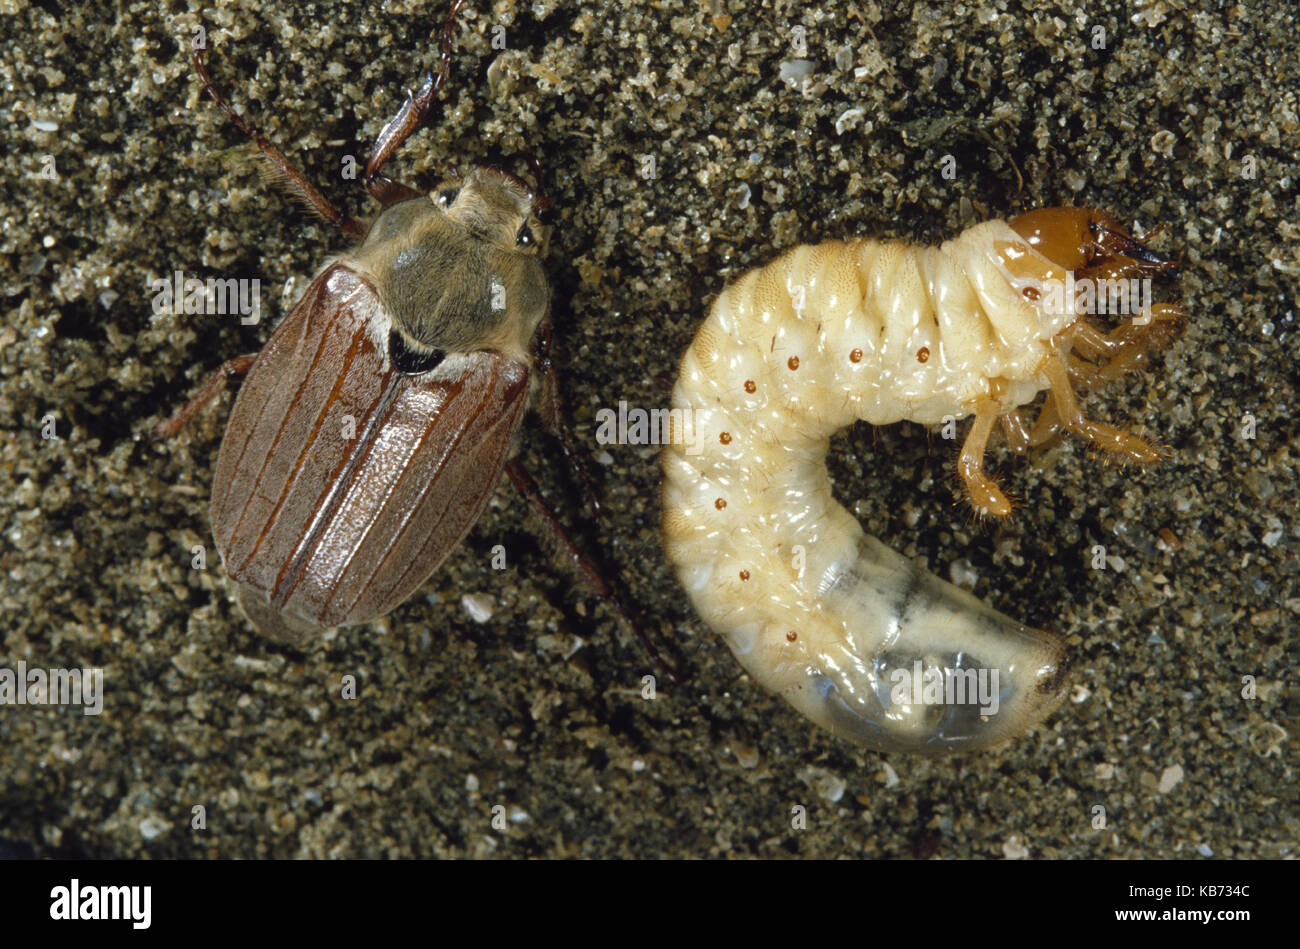 Cockchafer (Melolontha melolontha) with larva, Belgium Stock Photo